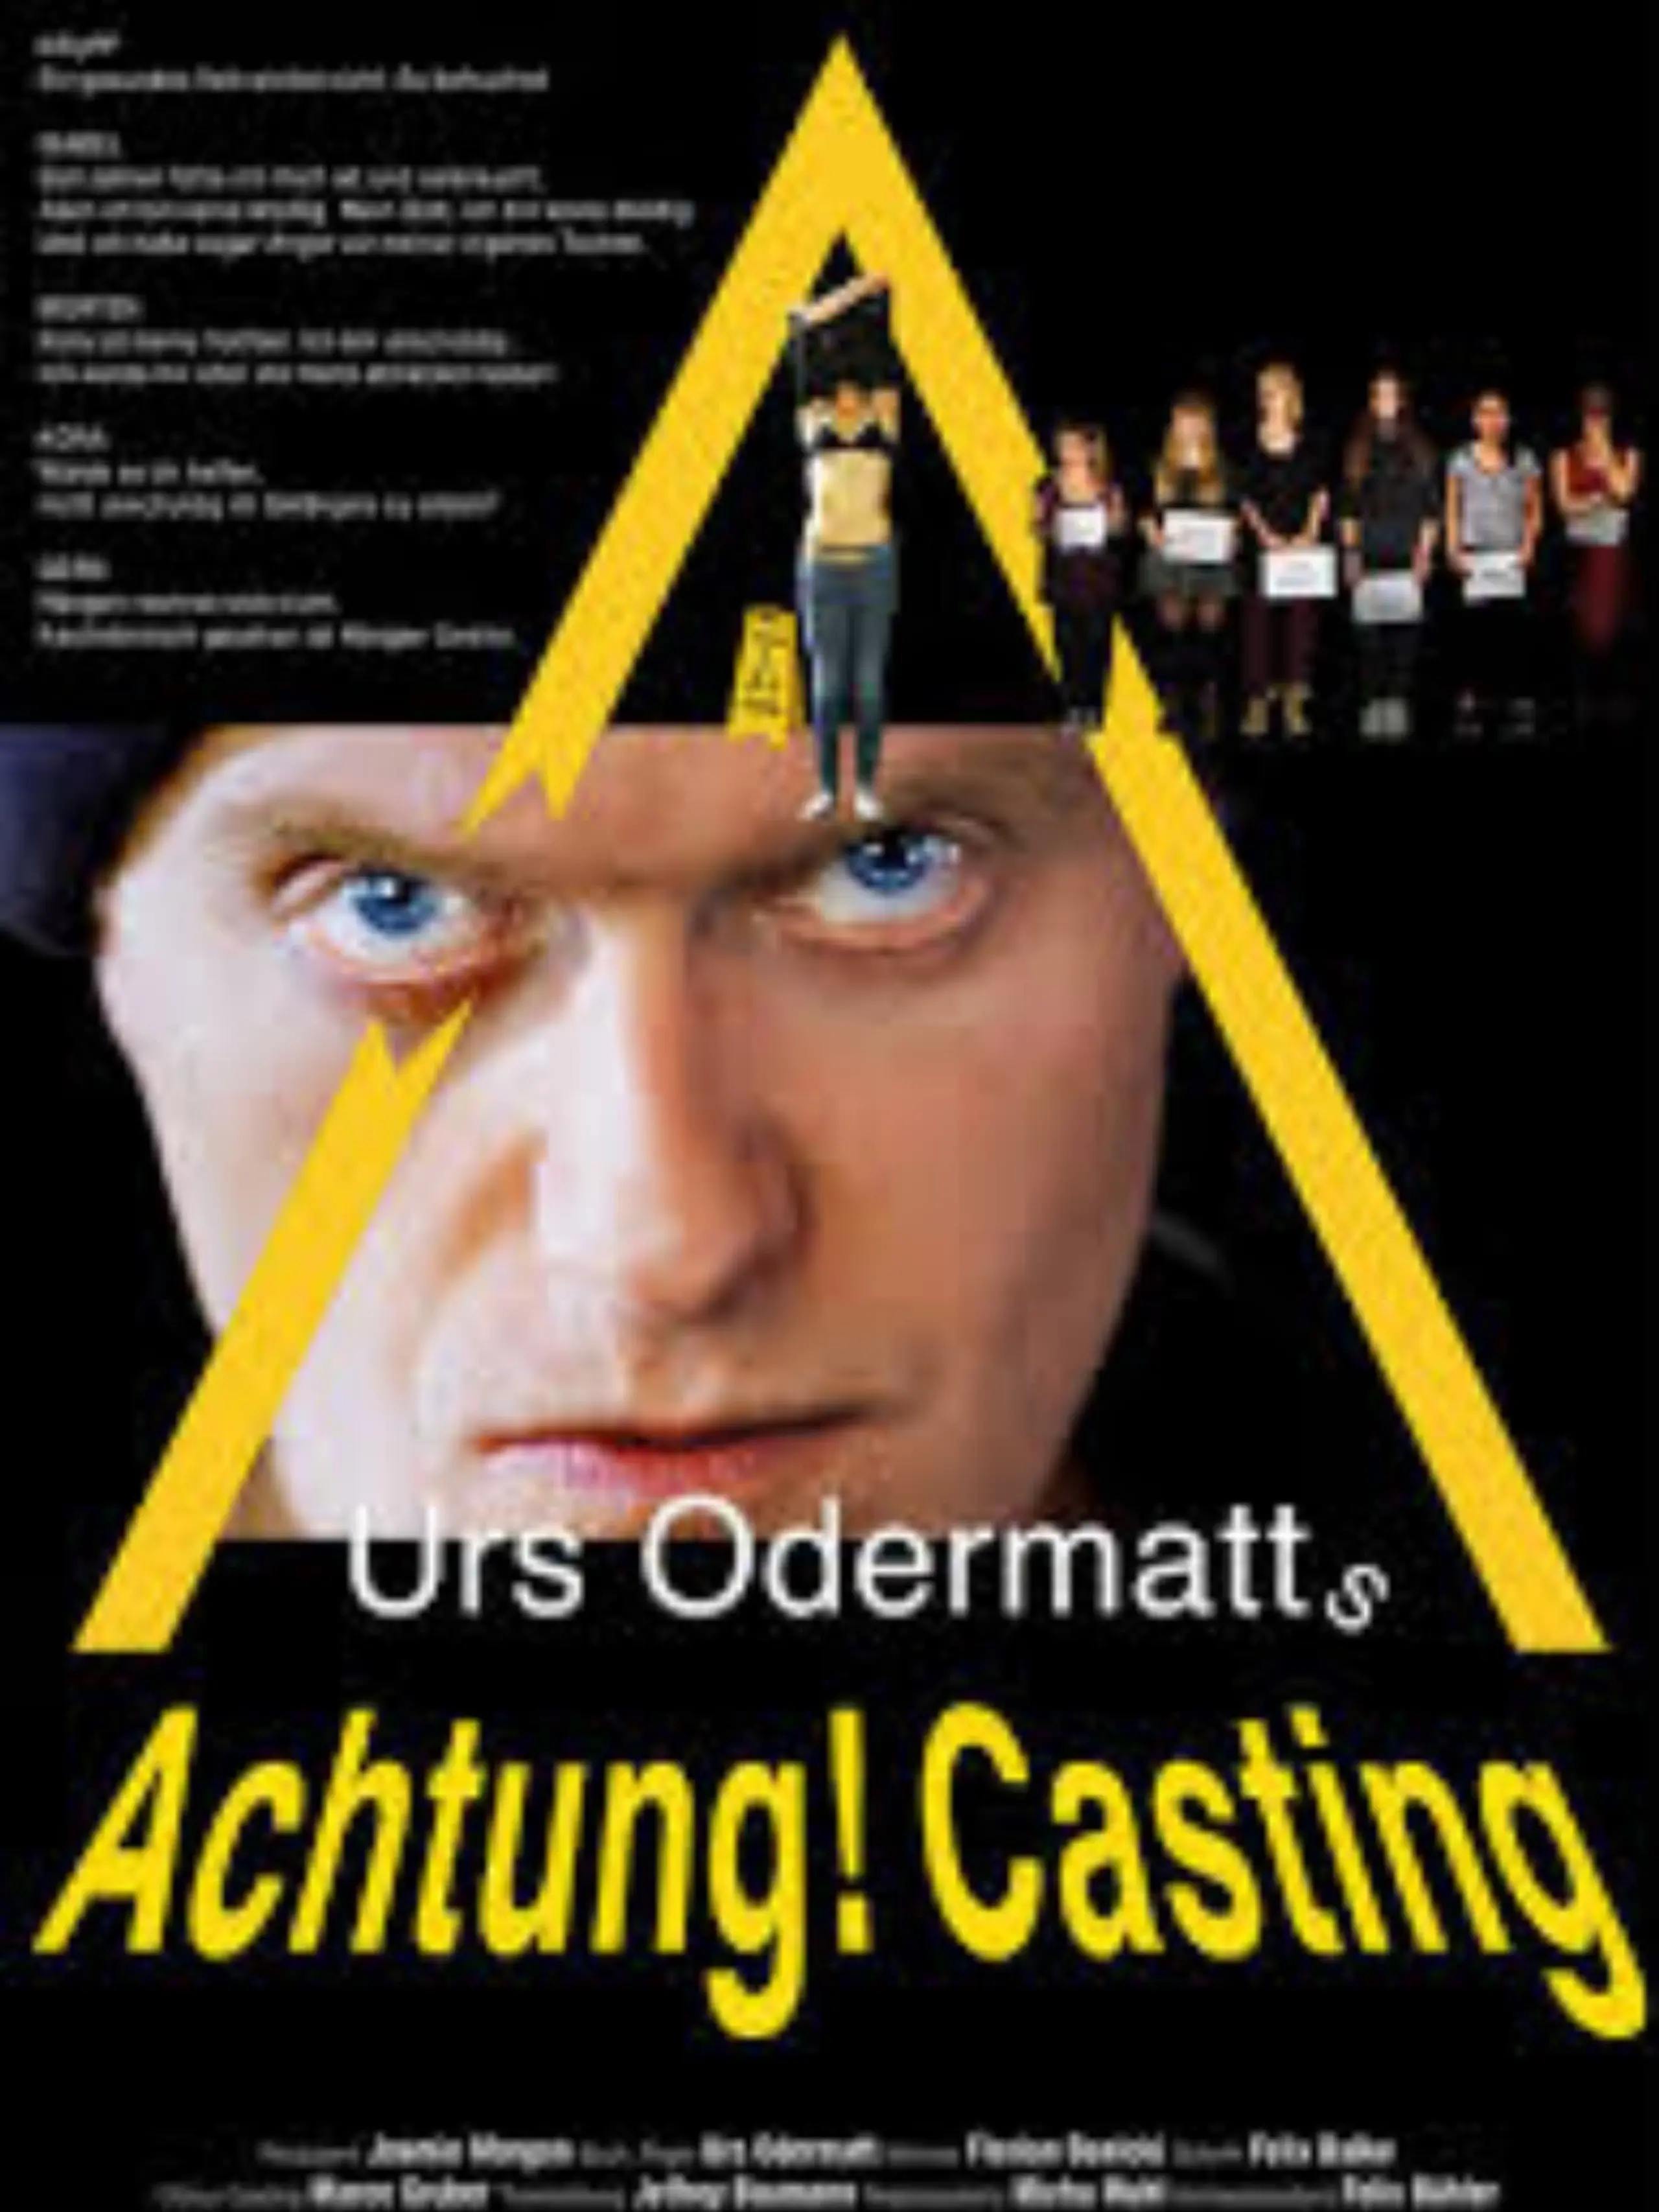 Achtung! Casting